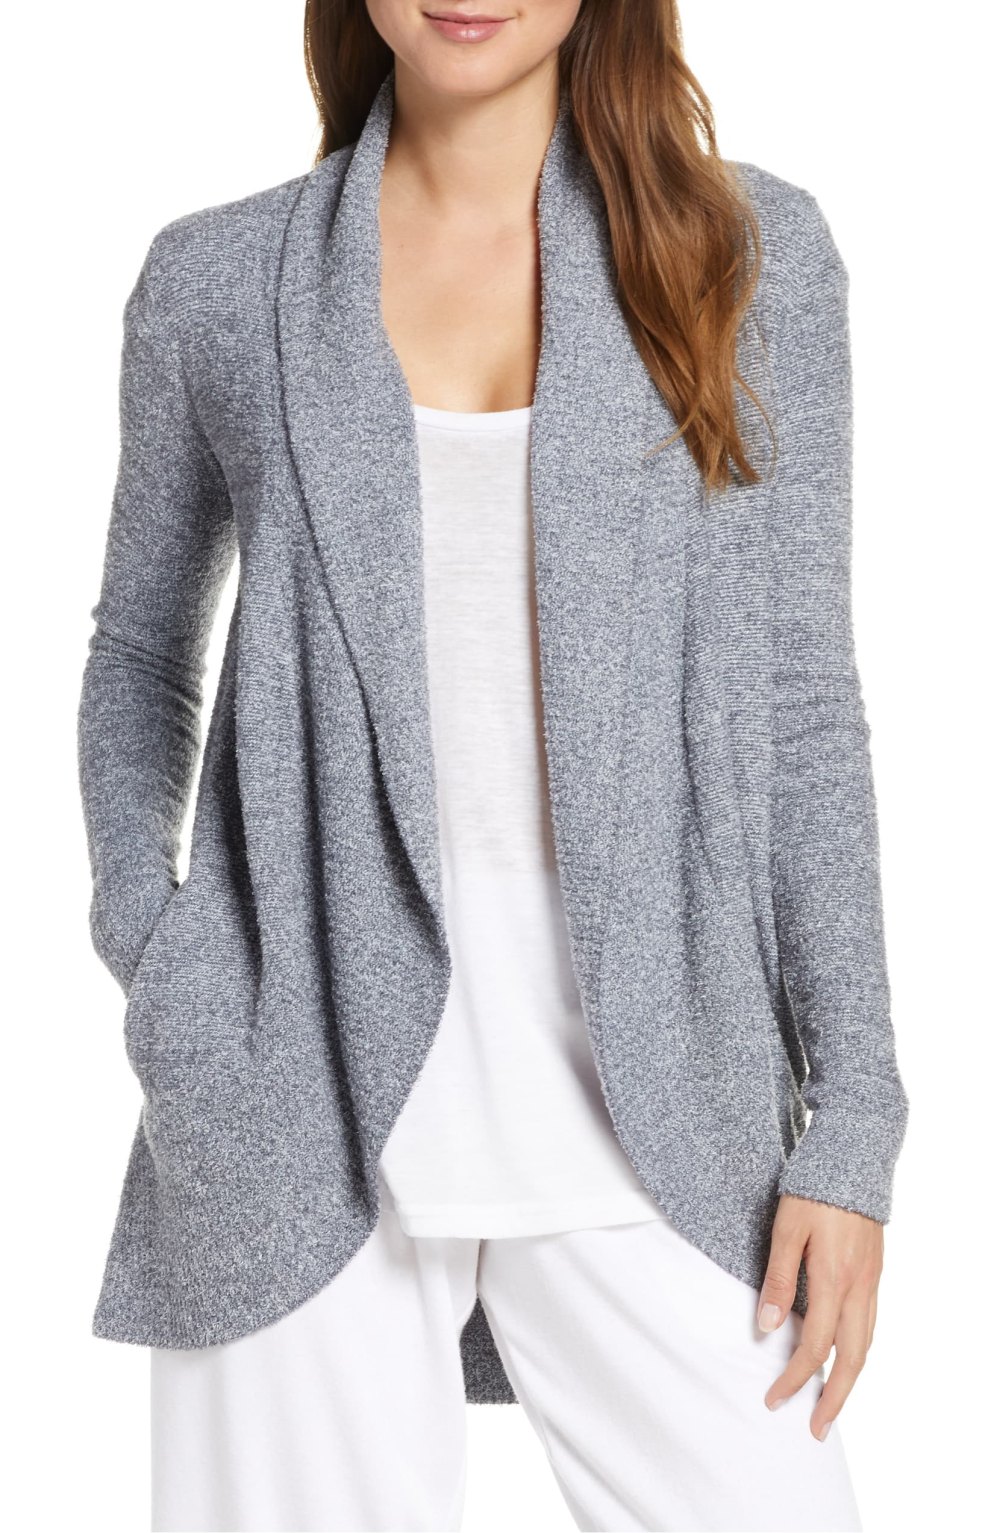 Barefoot Dreams Cozy Cardigan Comes in So Many New Colors